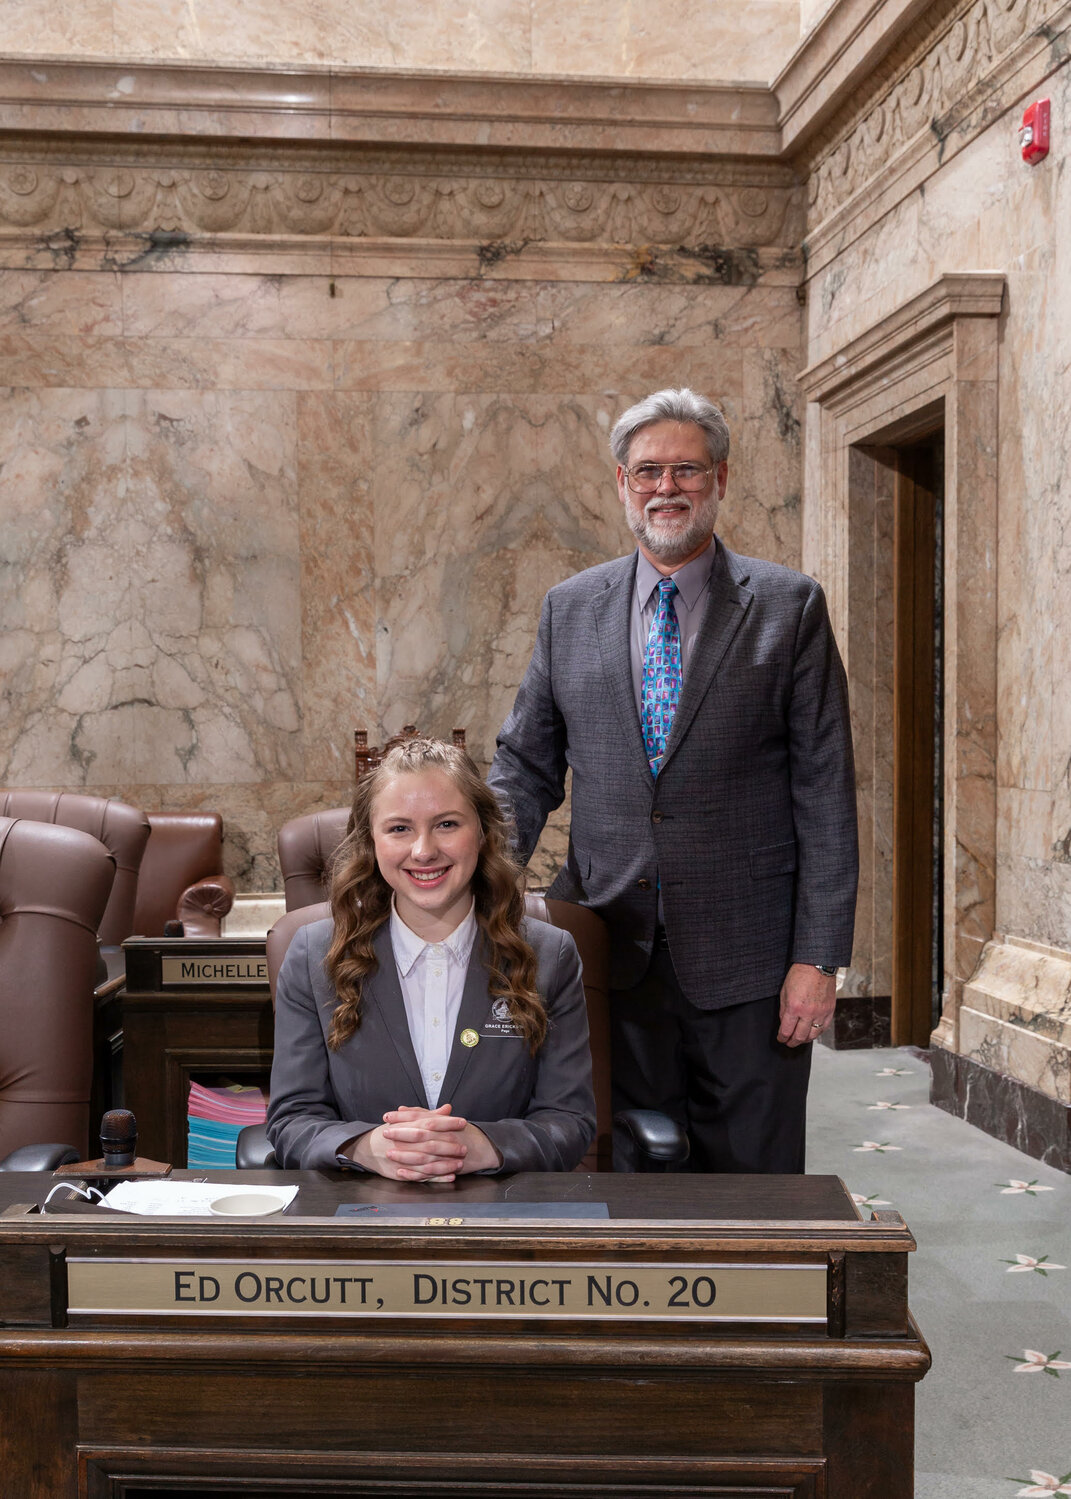 Grace Erickson, 11th-grade homeschool student from Ridgefield, attended Page School in Olympia with Rep. Ed Orcutt’s sponsorship.